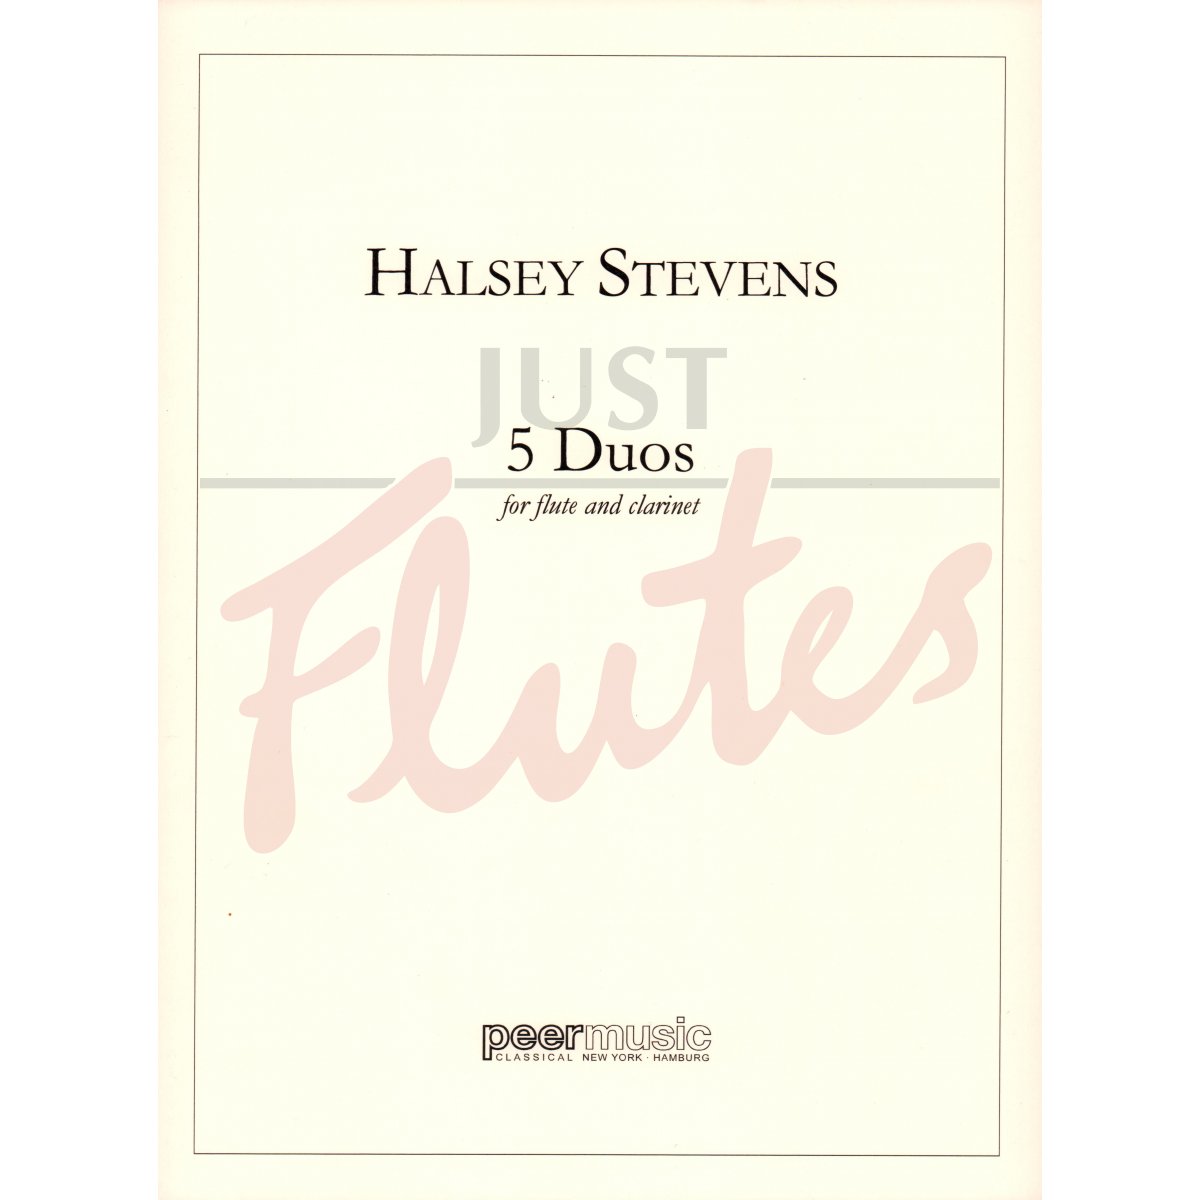 Five Duos for Flute and Clarinet